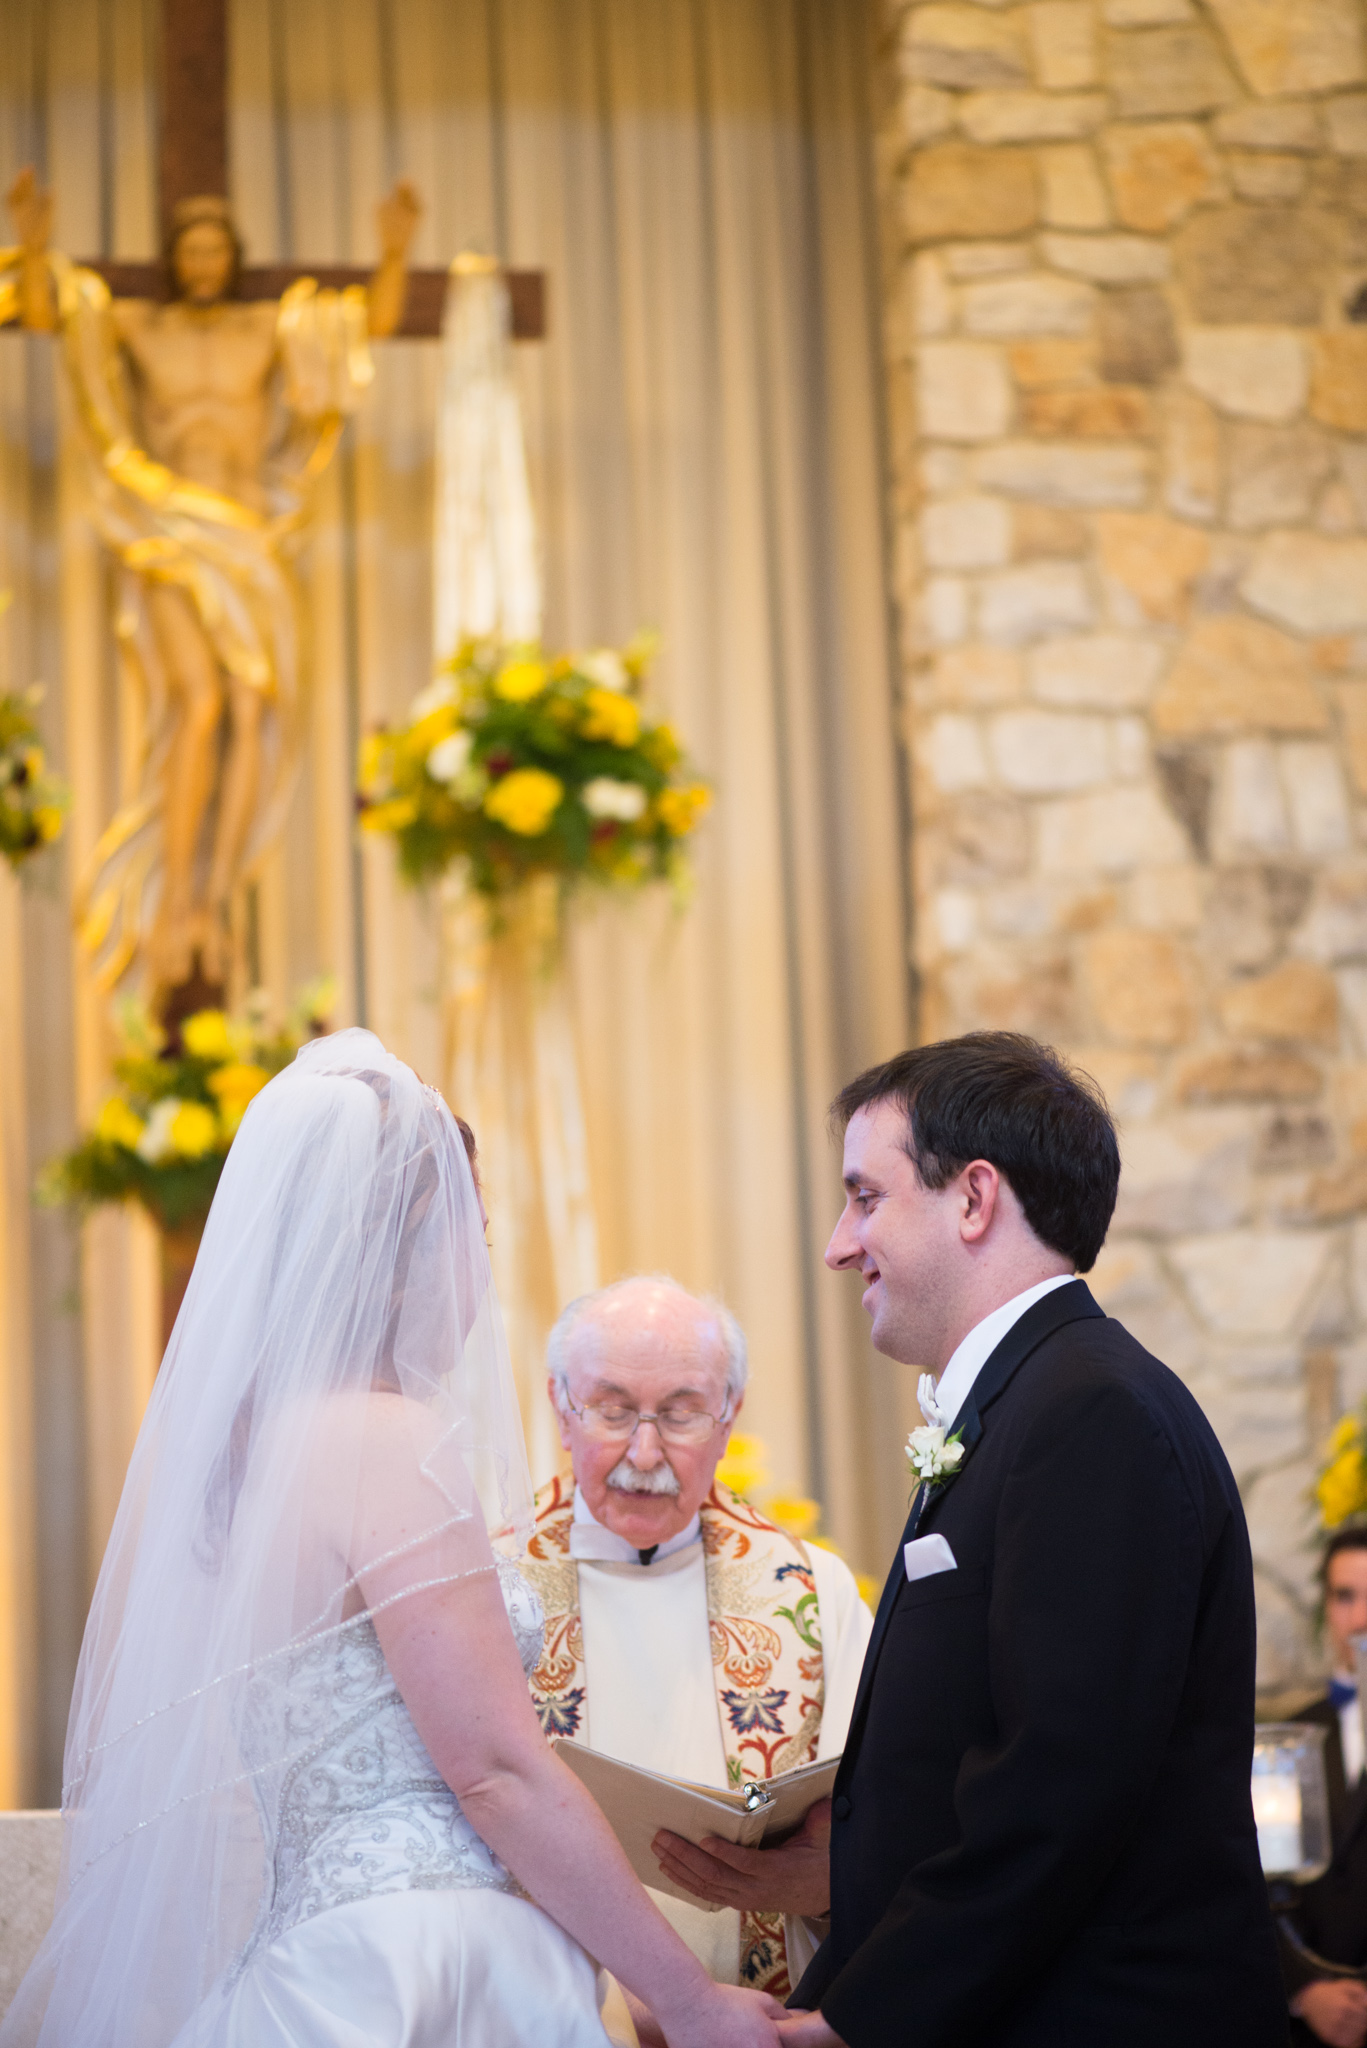 Our Lady of Hope St. Mary's Church Blackwood New Jersey Wedding Ceremony photo